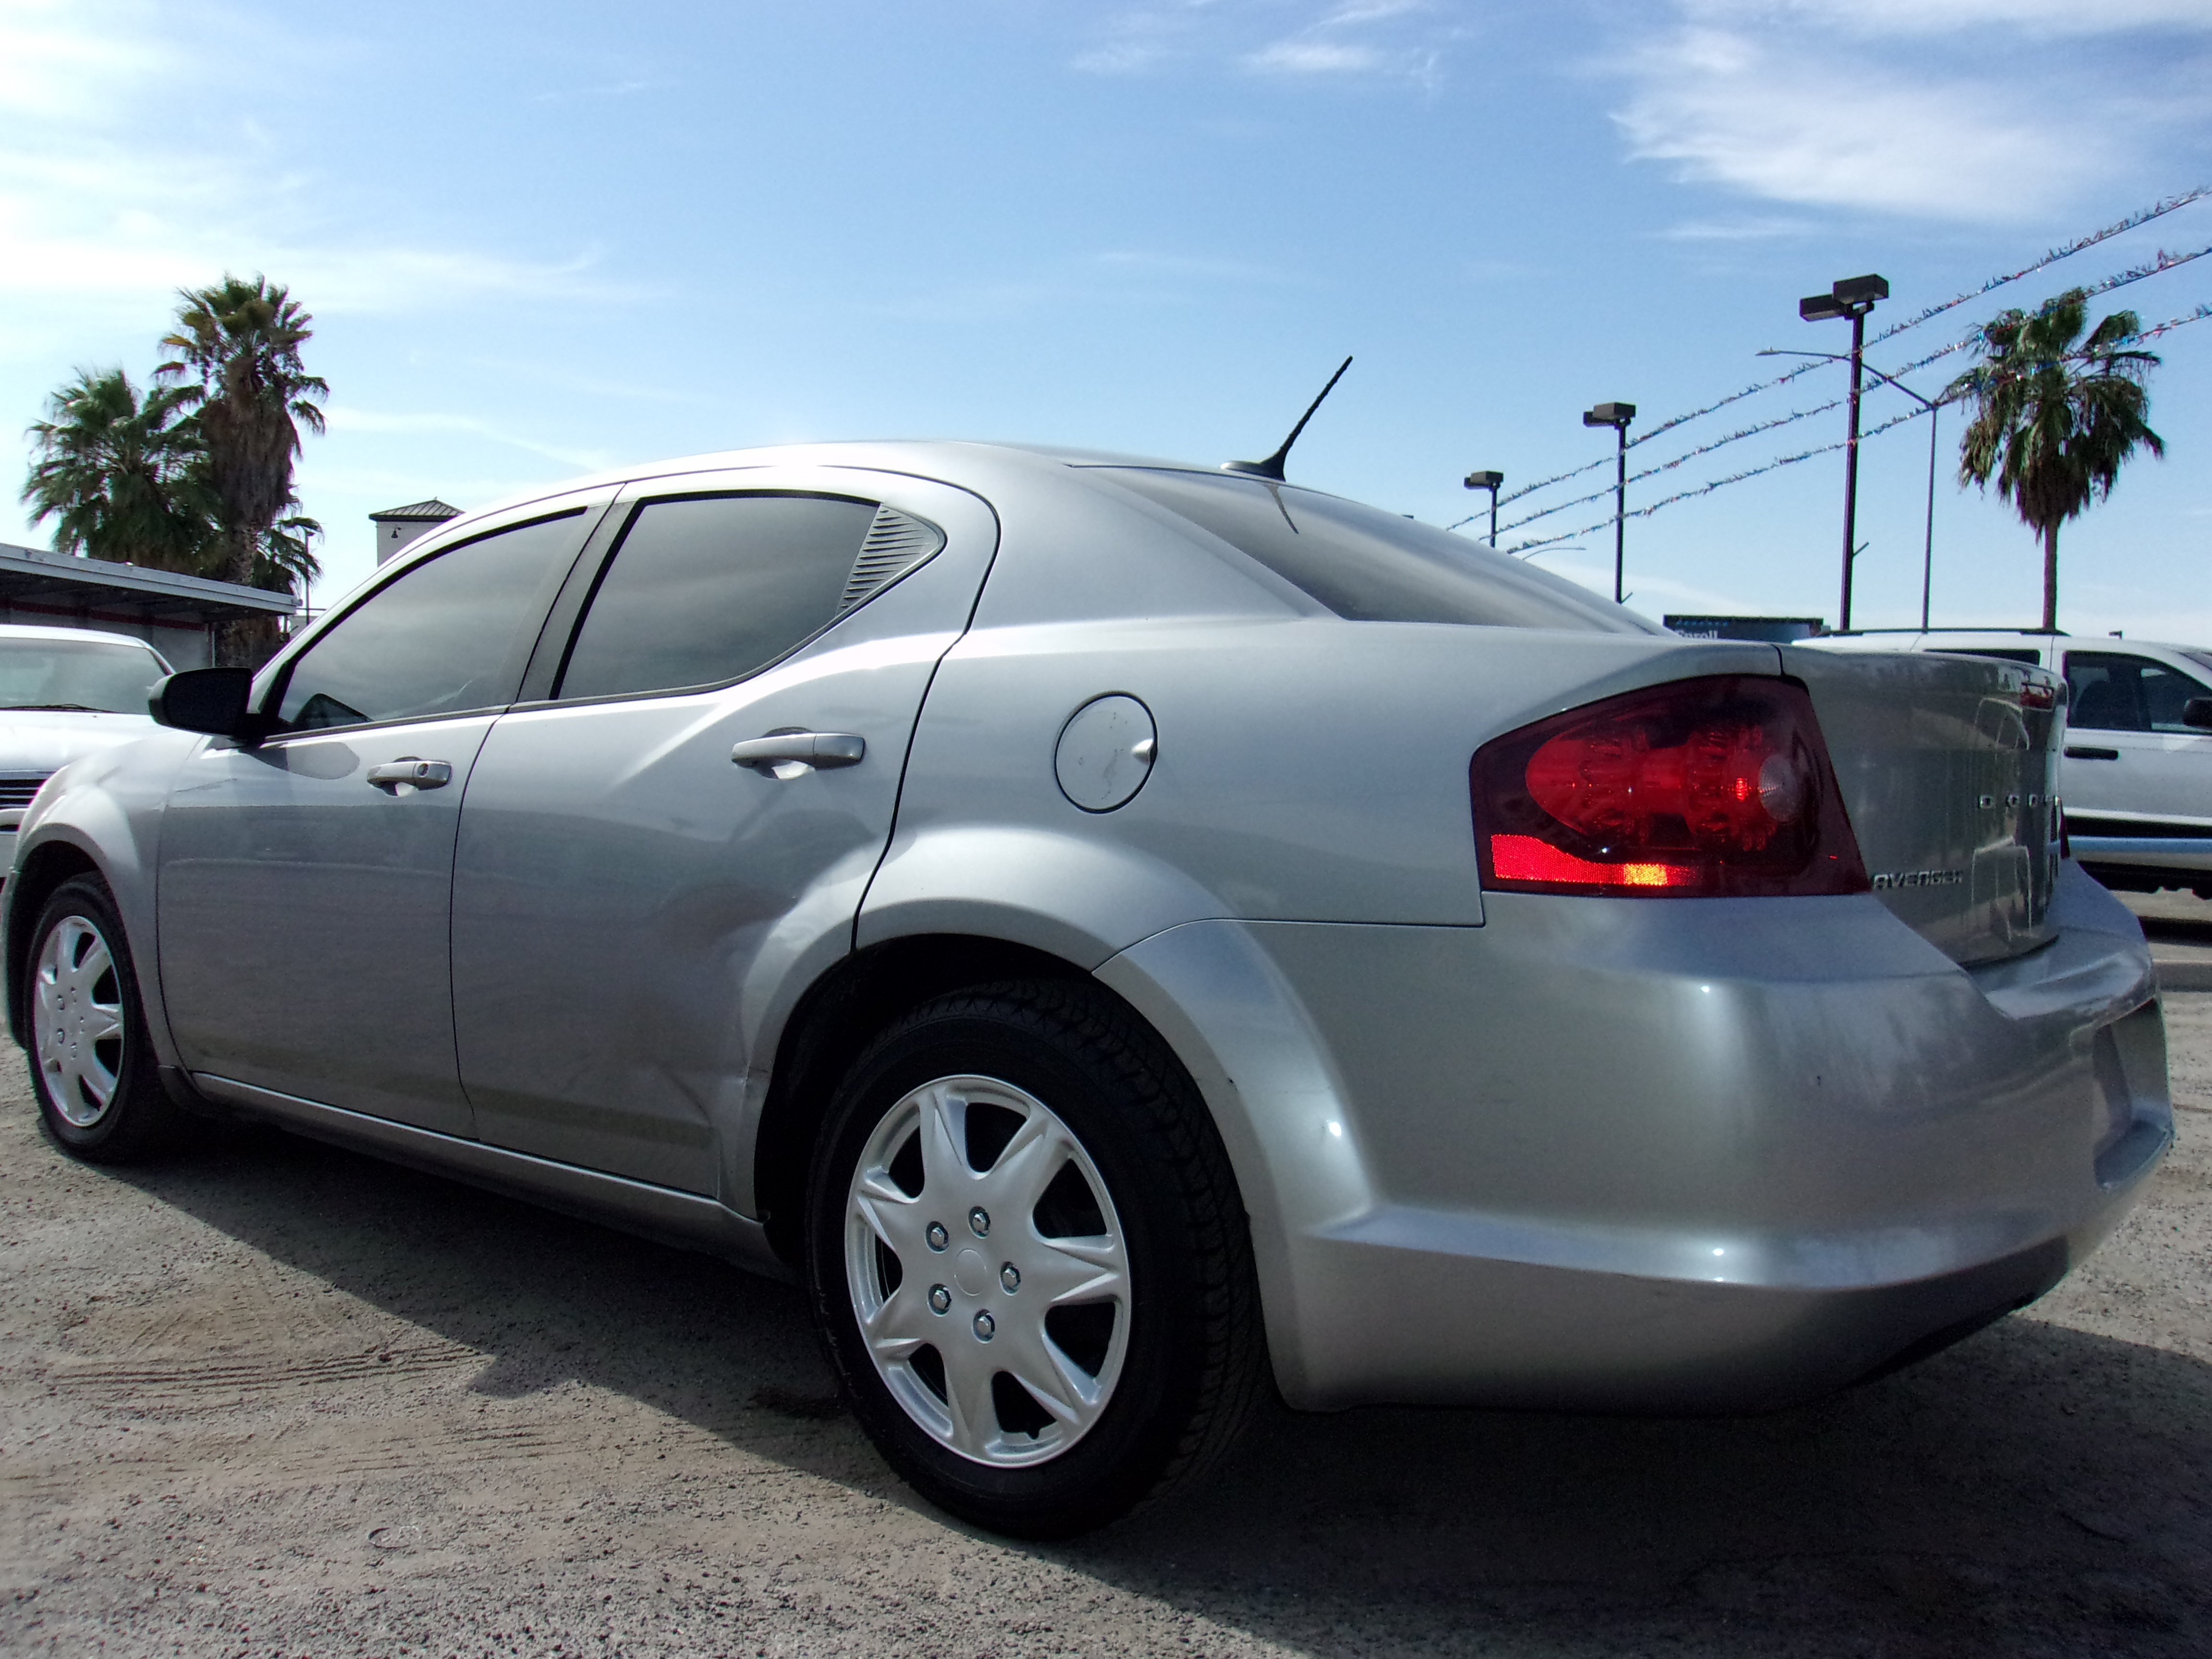 PreOwned 2014 DODGE AVENGER 4dr Car in Tucson S7650 Tucson Used Car